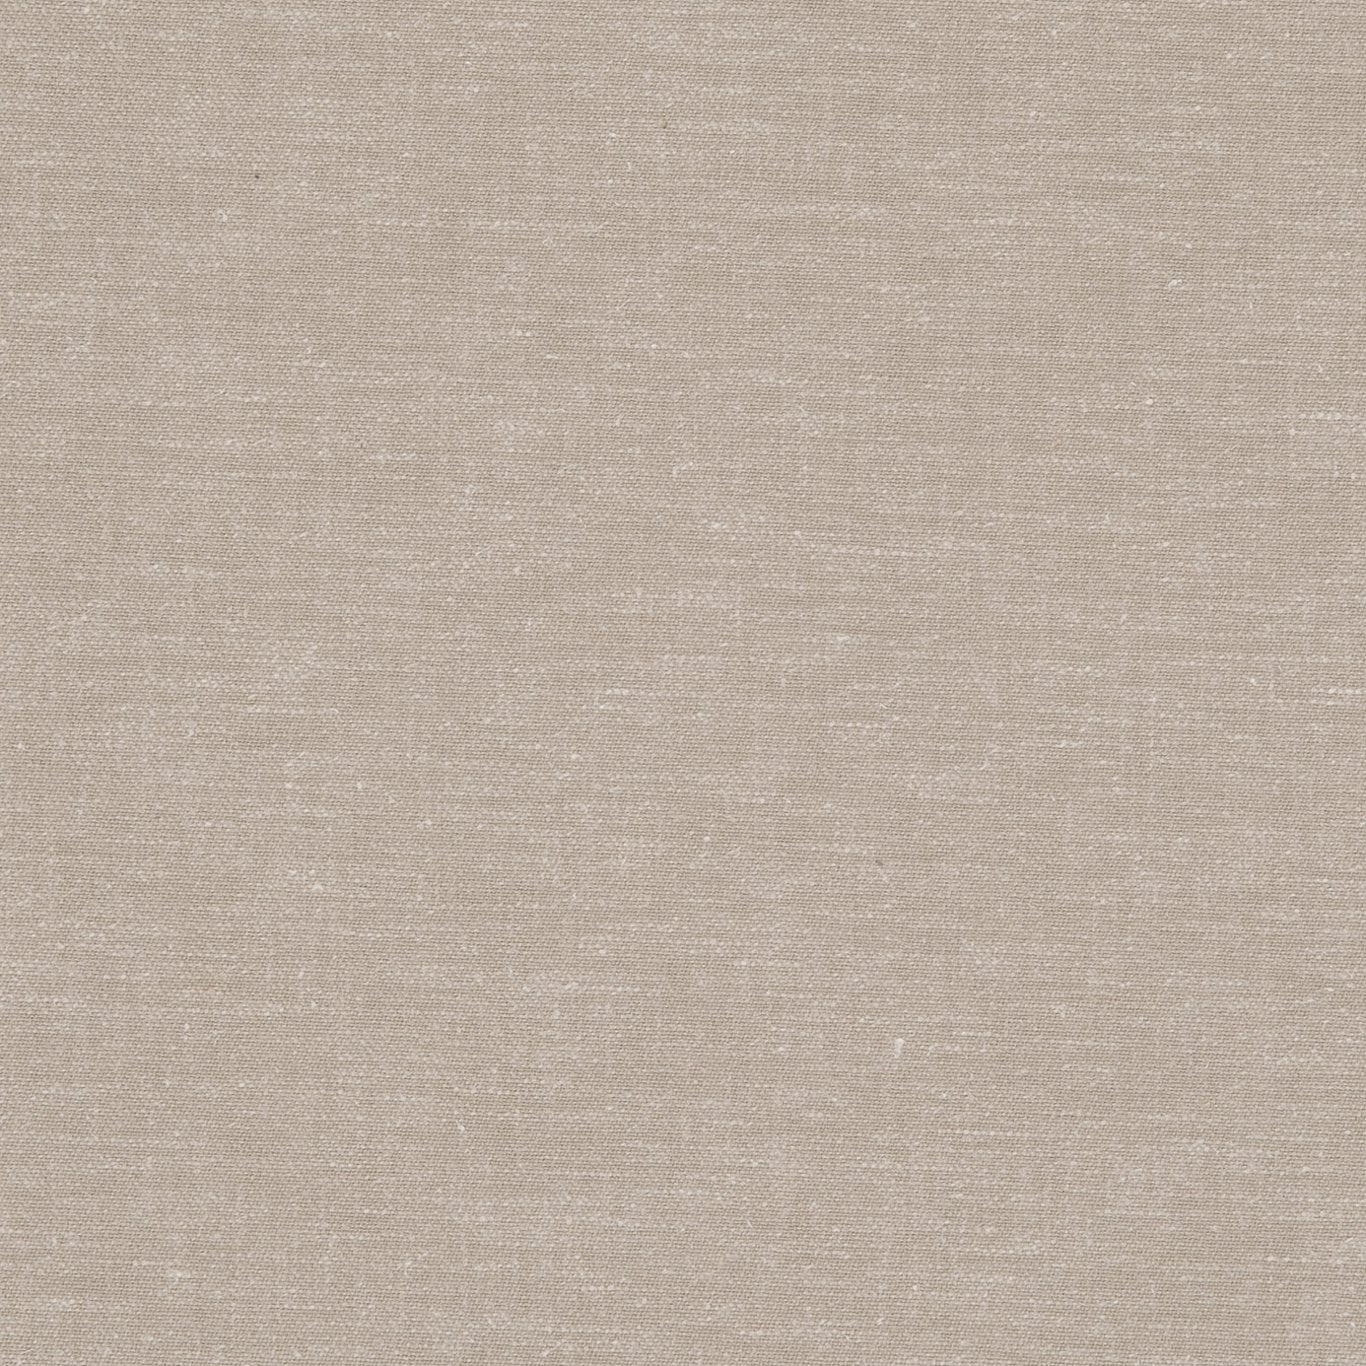 Abbey Fabric by Clarke & Clarke - F0595/04 - Natural